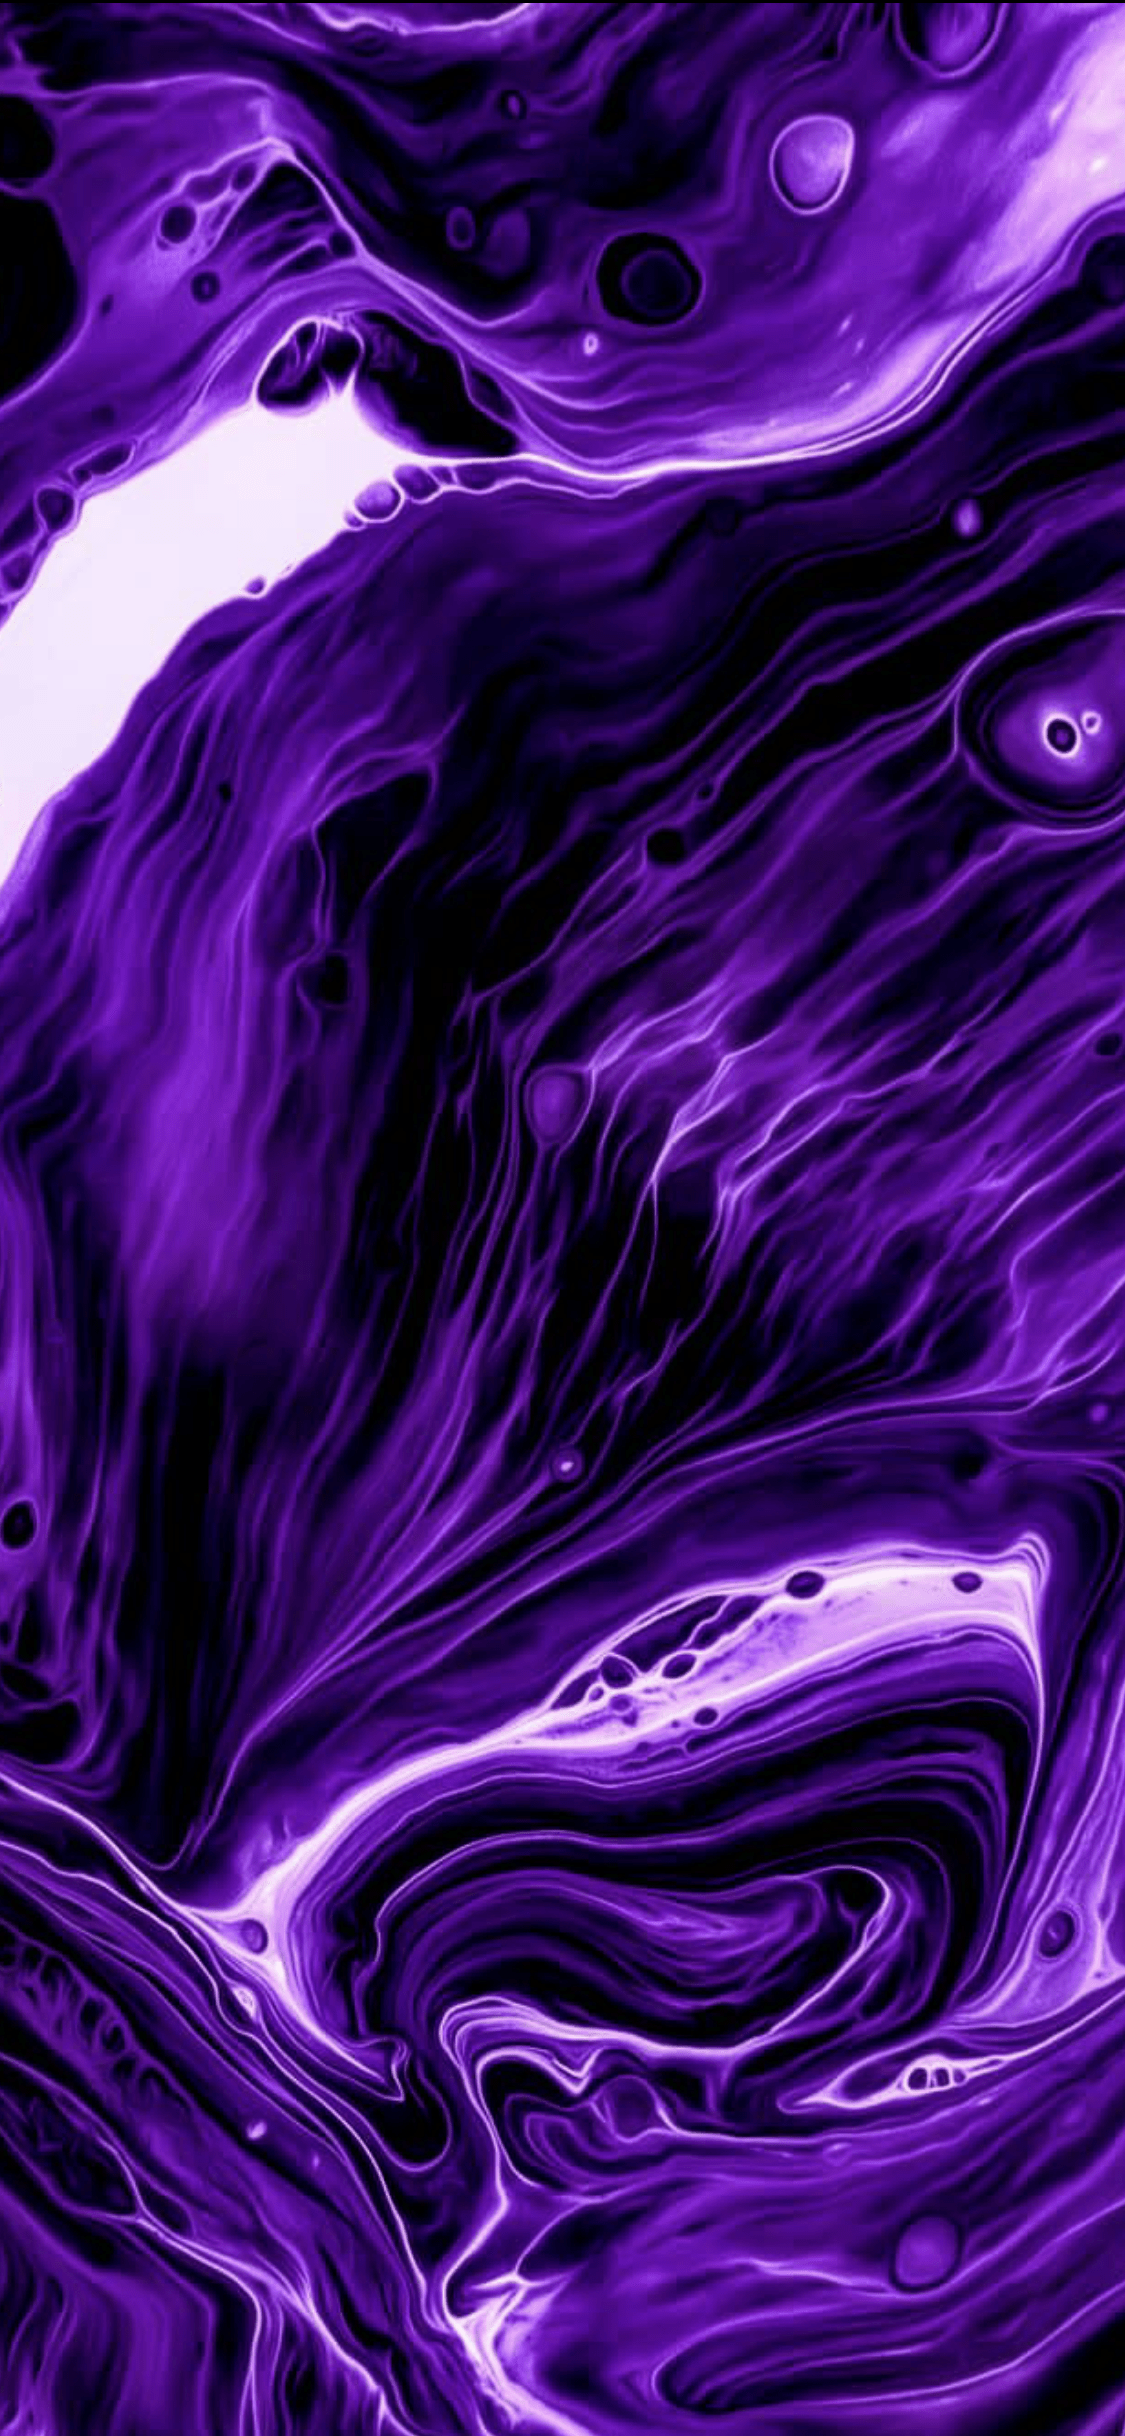 1194274 LSD purple trippy abstract psychedelic  Rare Gallery HD  Wallpapers